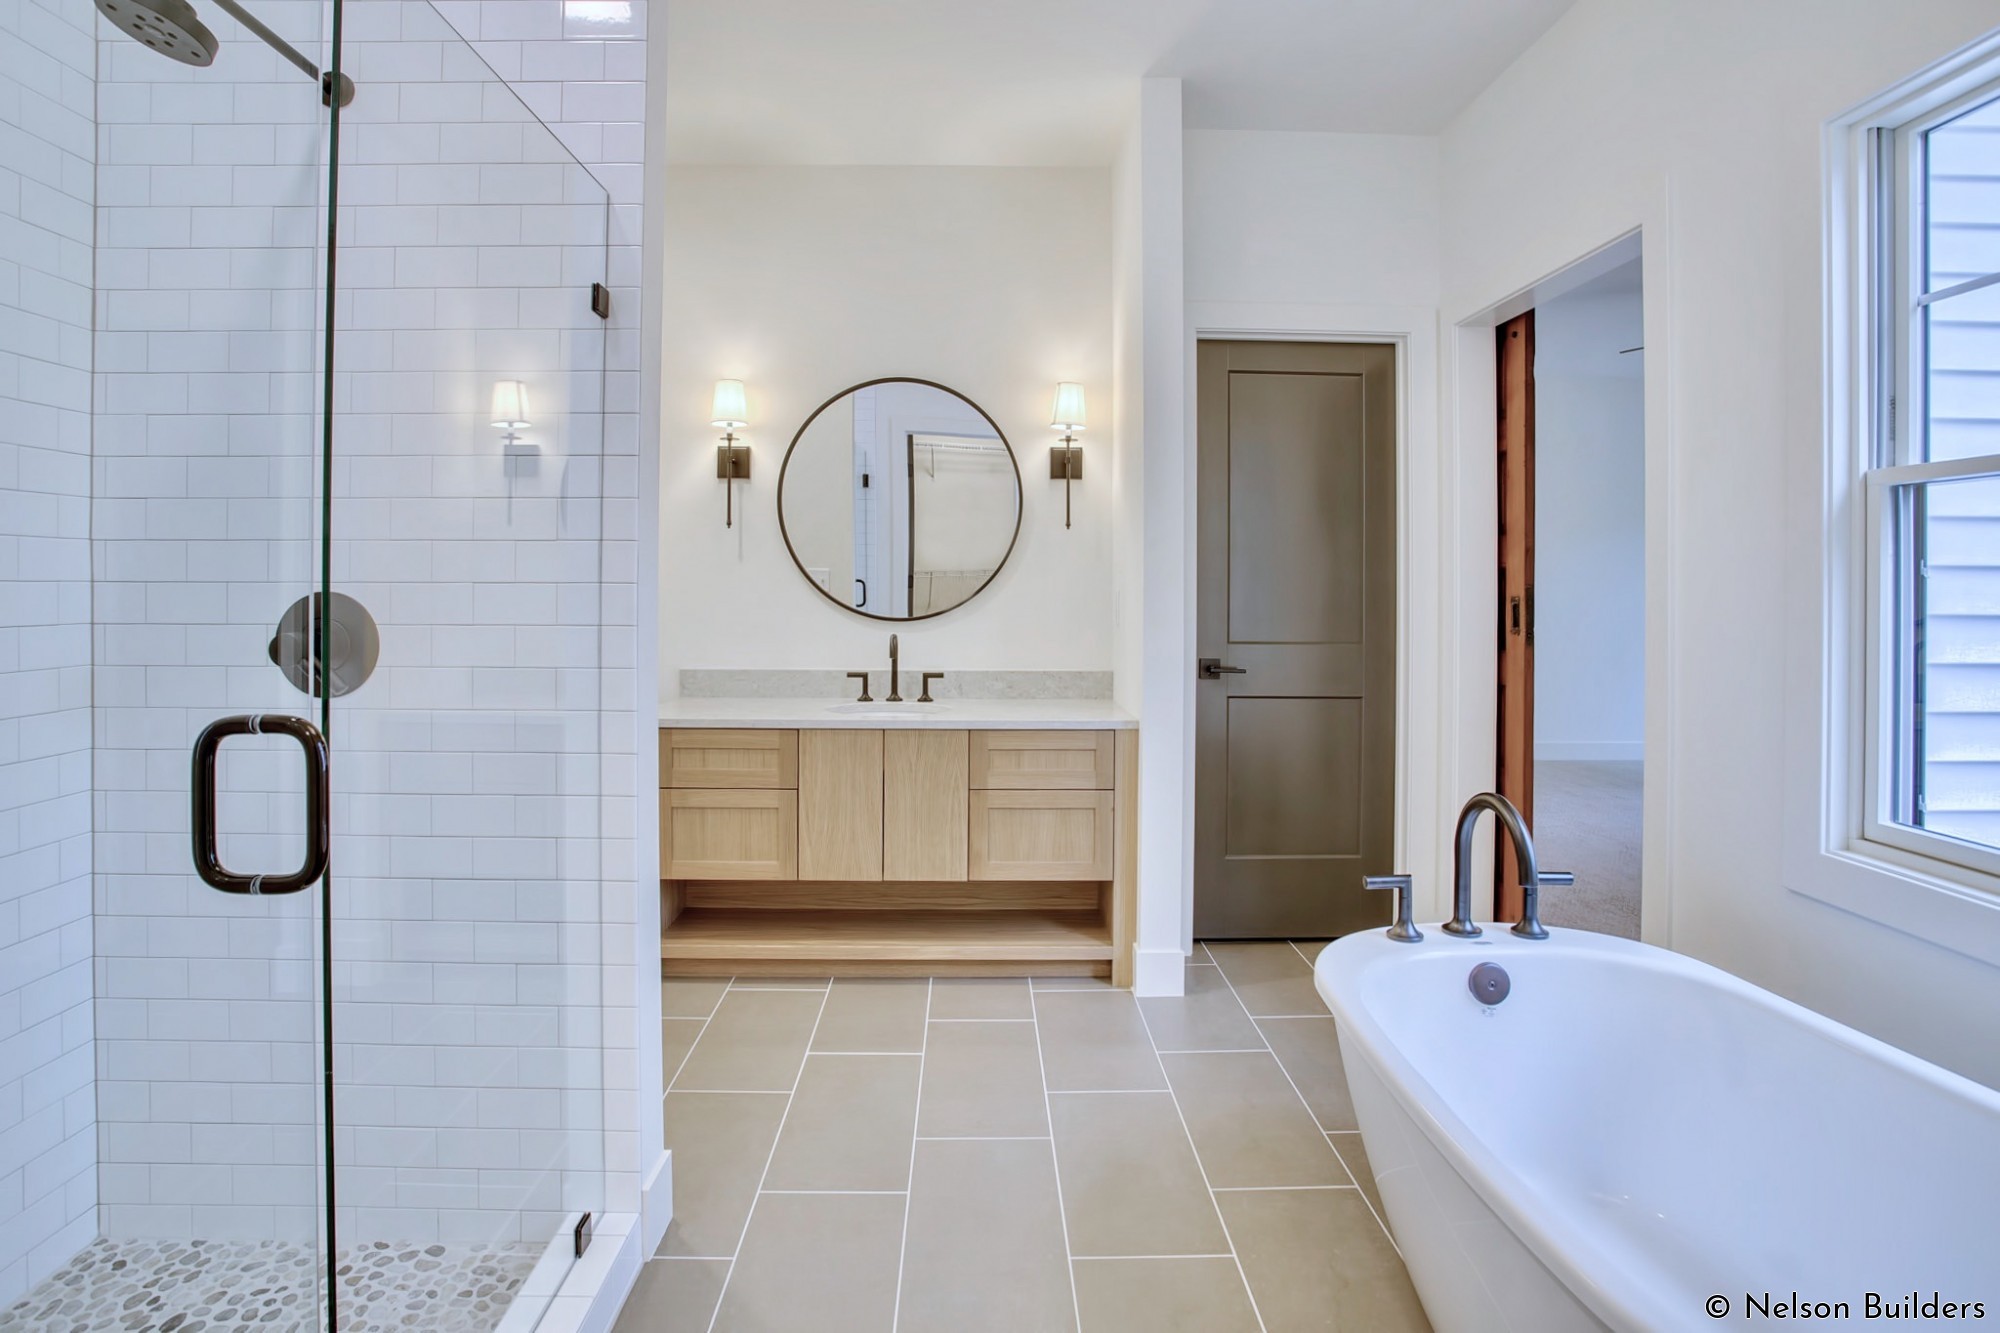 The master bath features custom white oak cabinets, a pebble-tile shower floor, and soaking tub.